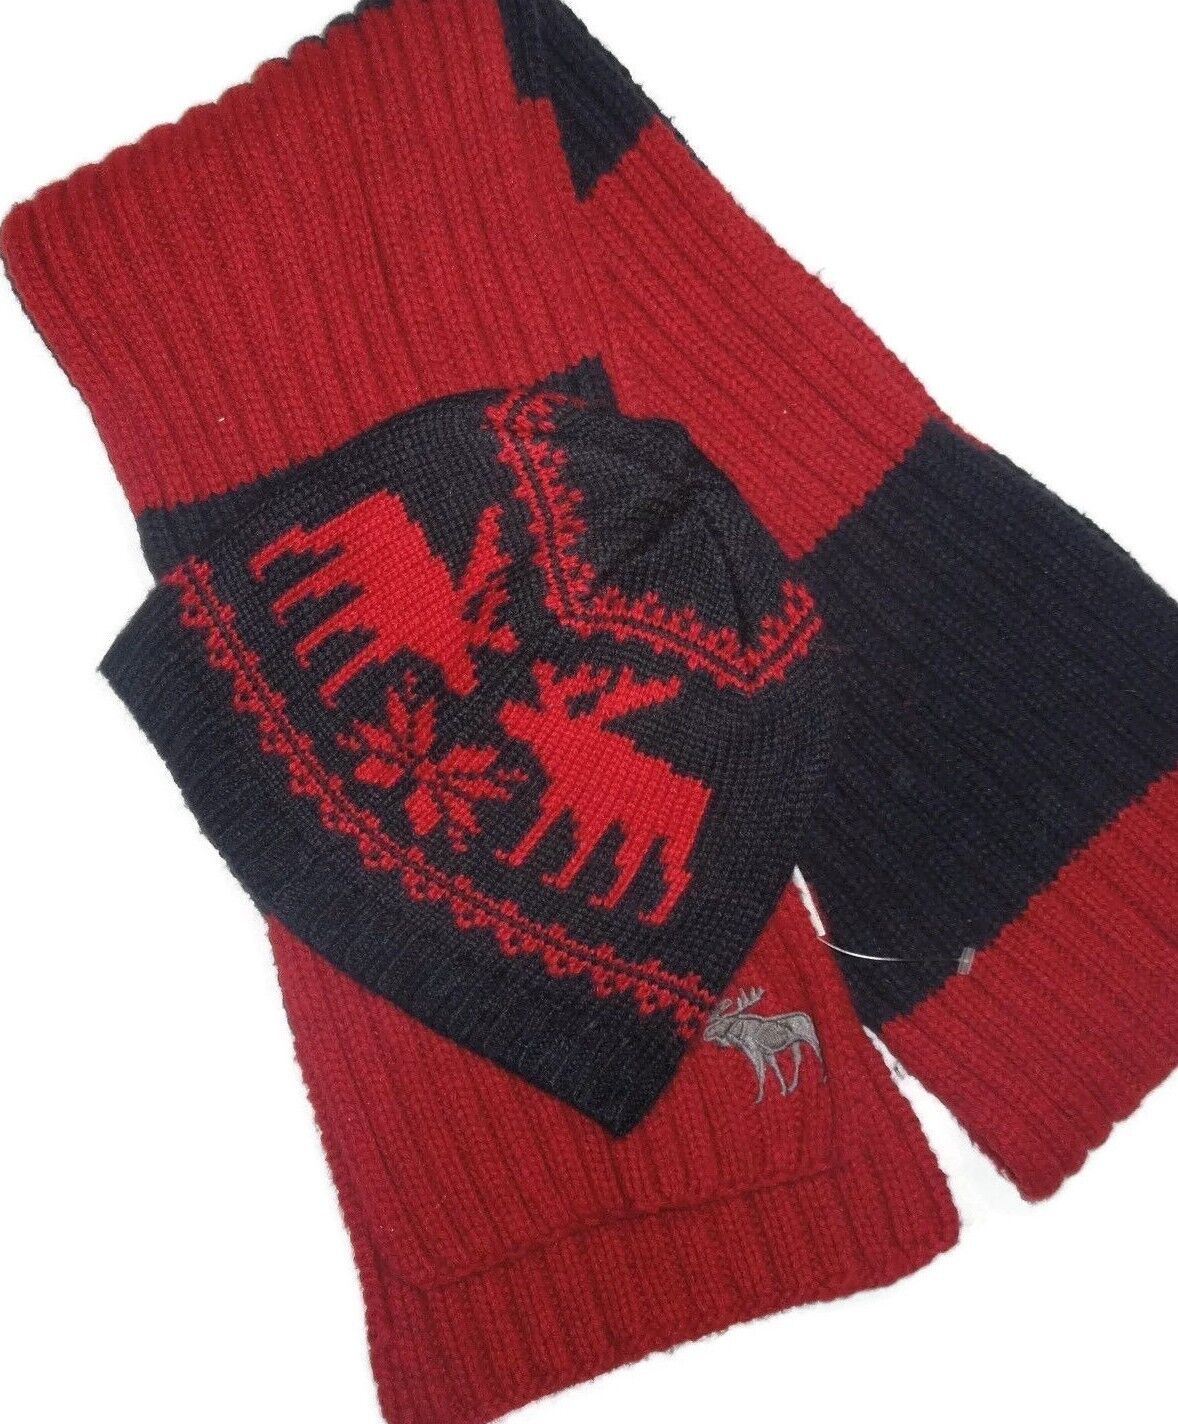  Abercrombie & Fitch men's red & navy knit winter Scarf and H...